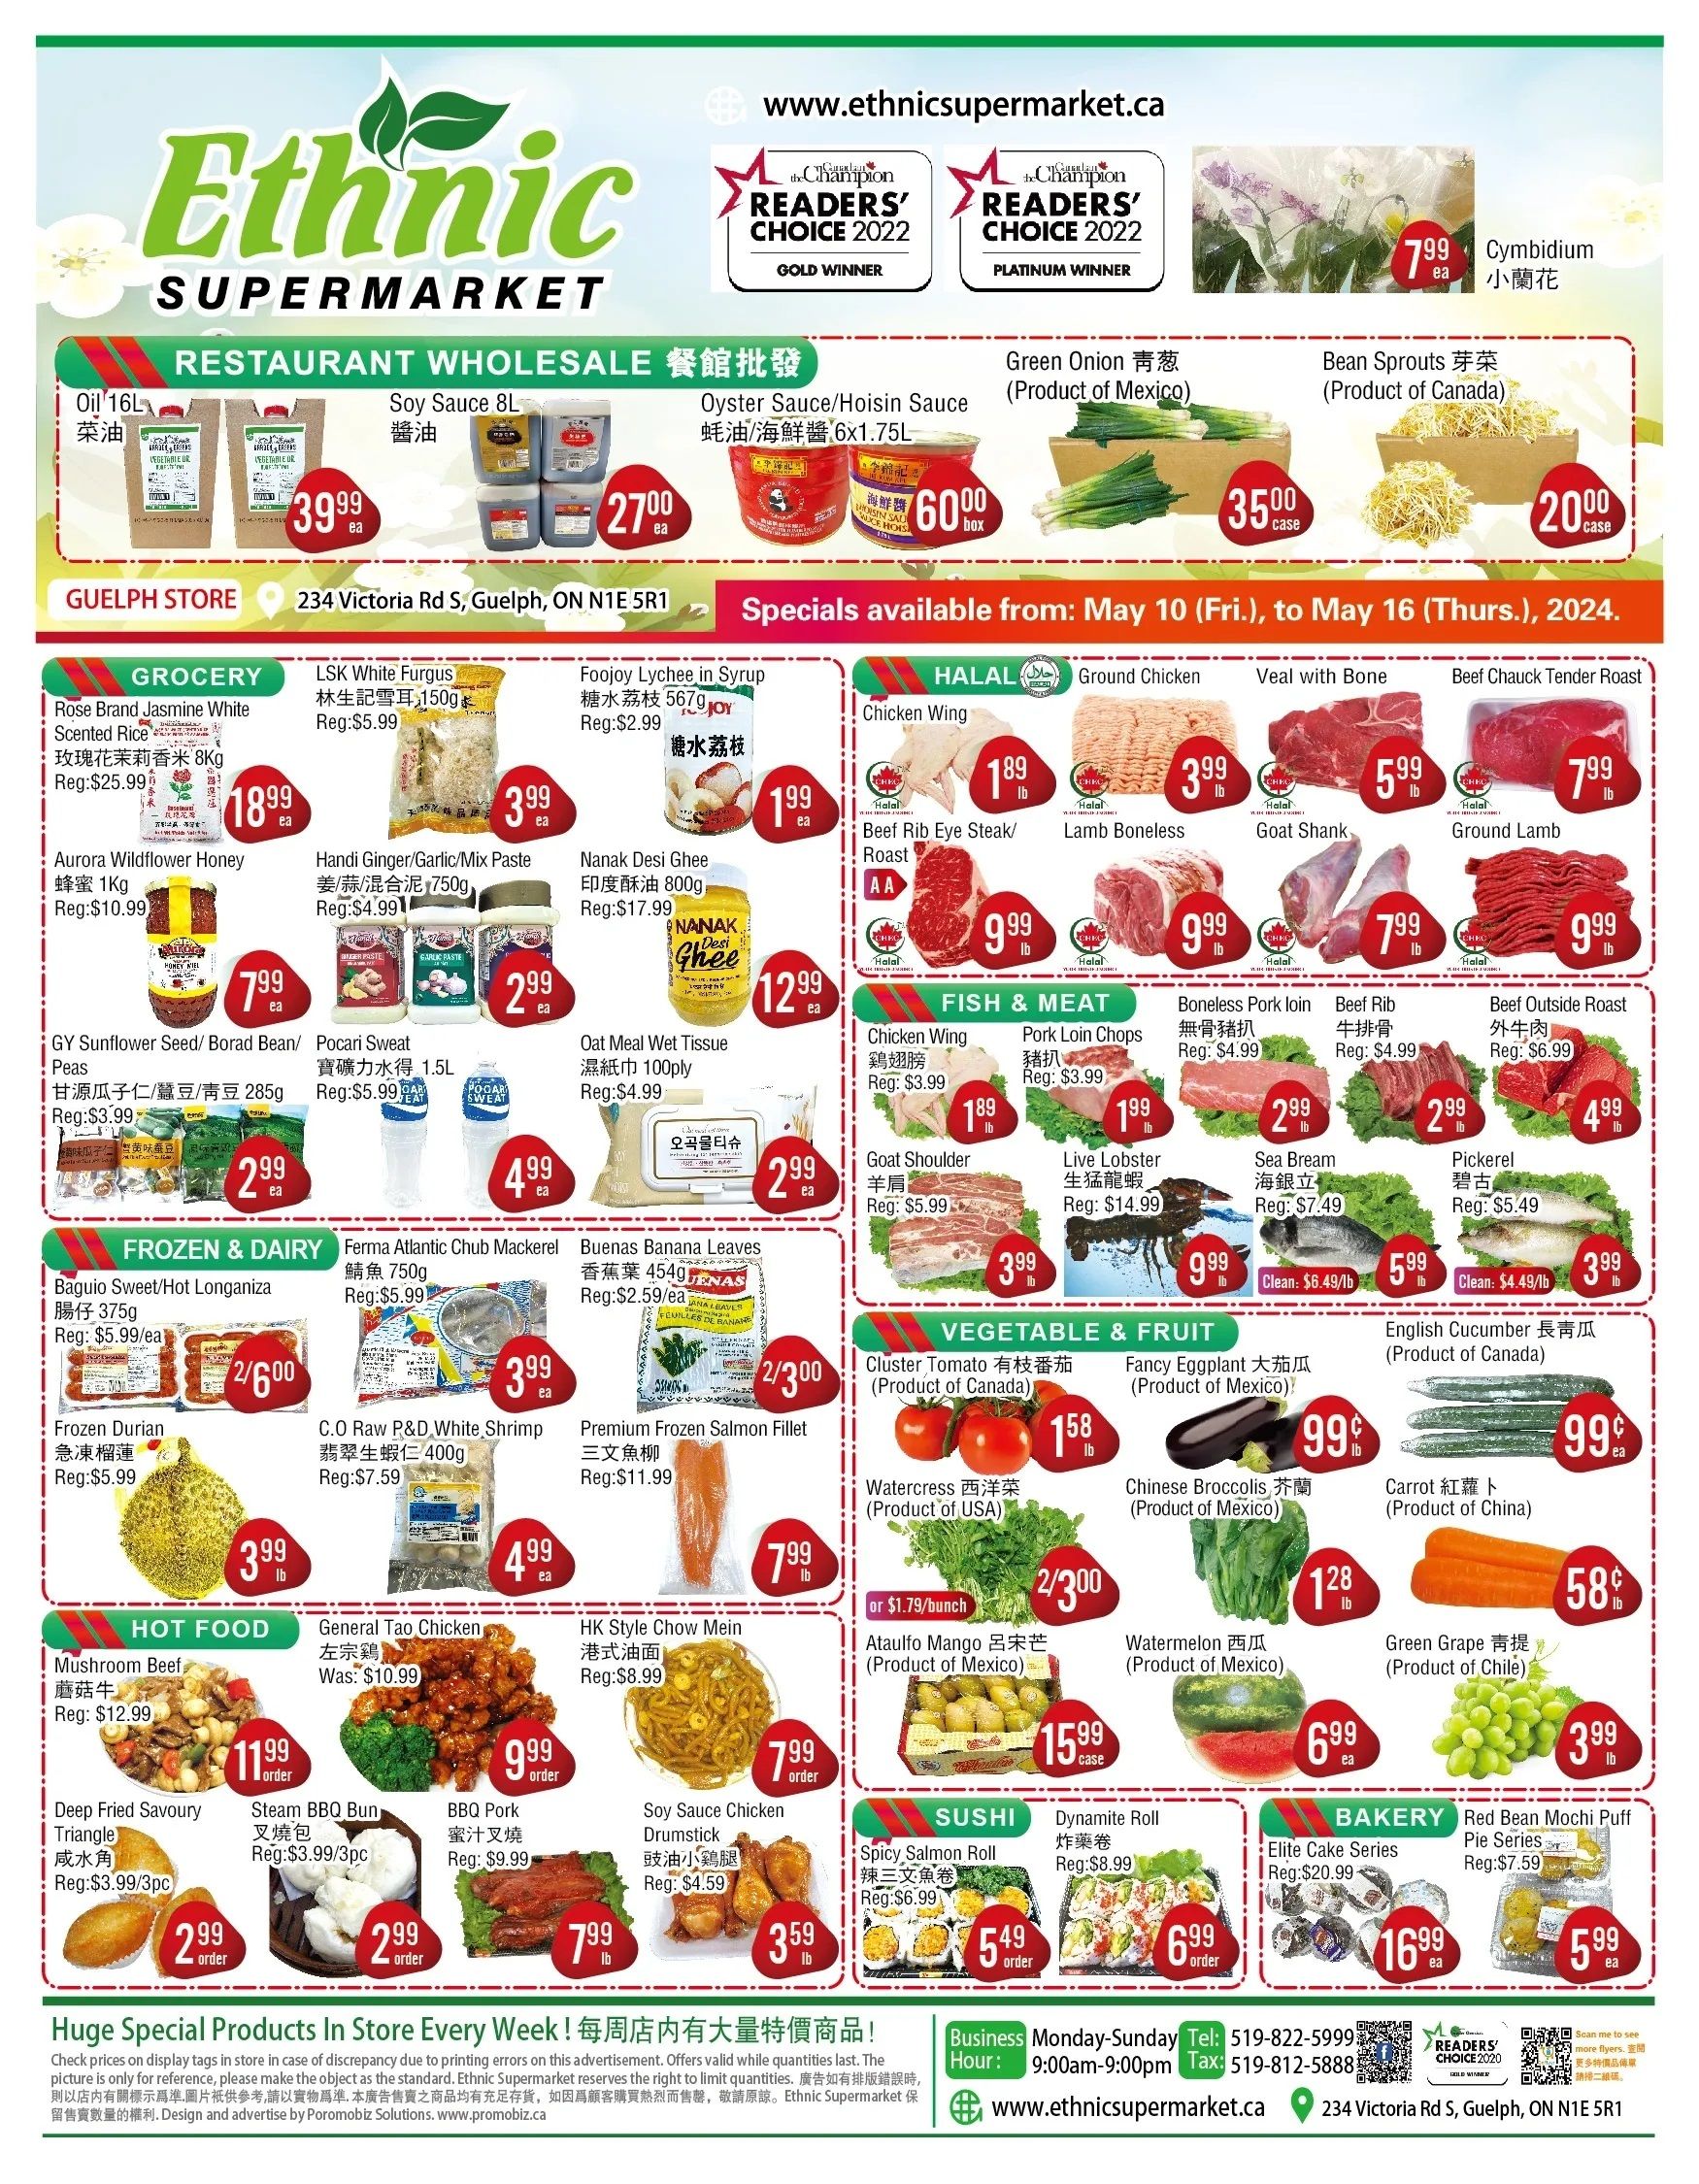 Ethnic Supermarket - Guelph Store - Weekly Flyer Specials